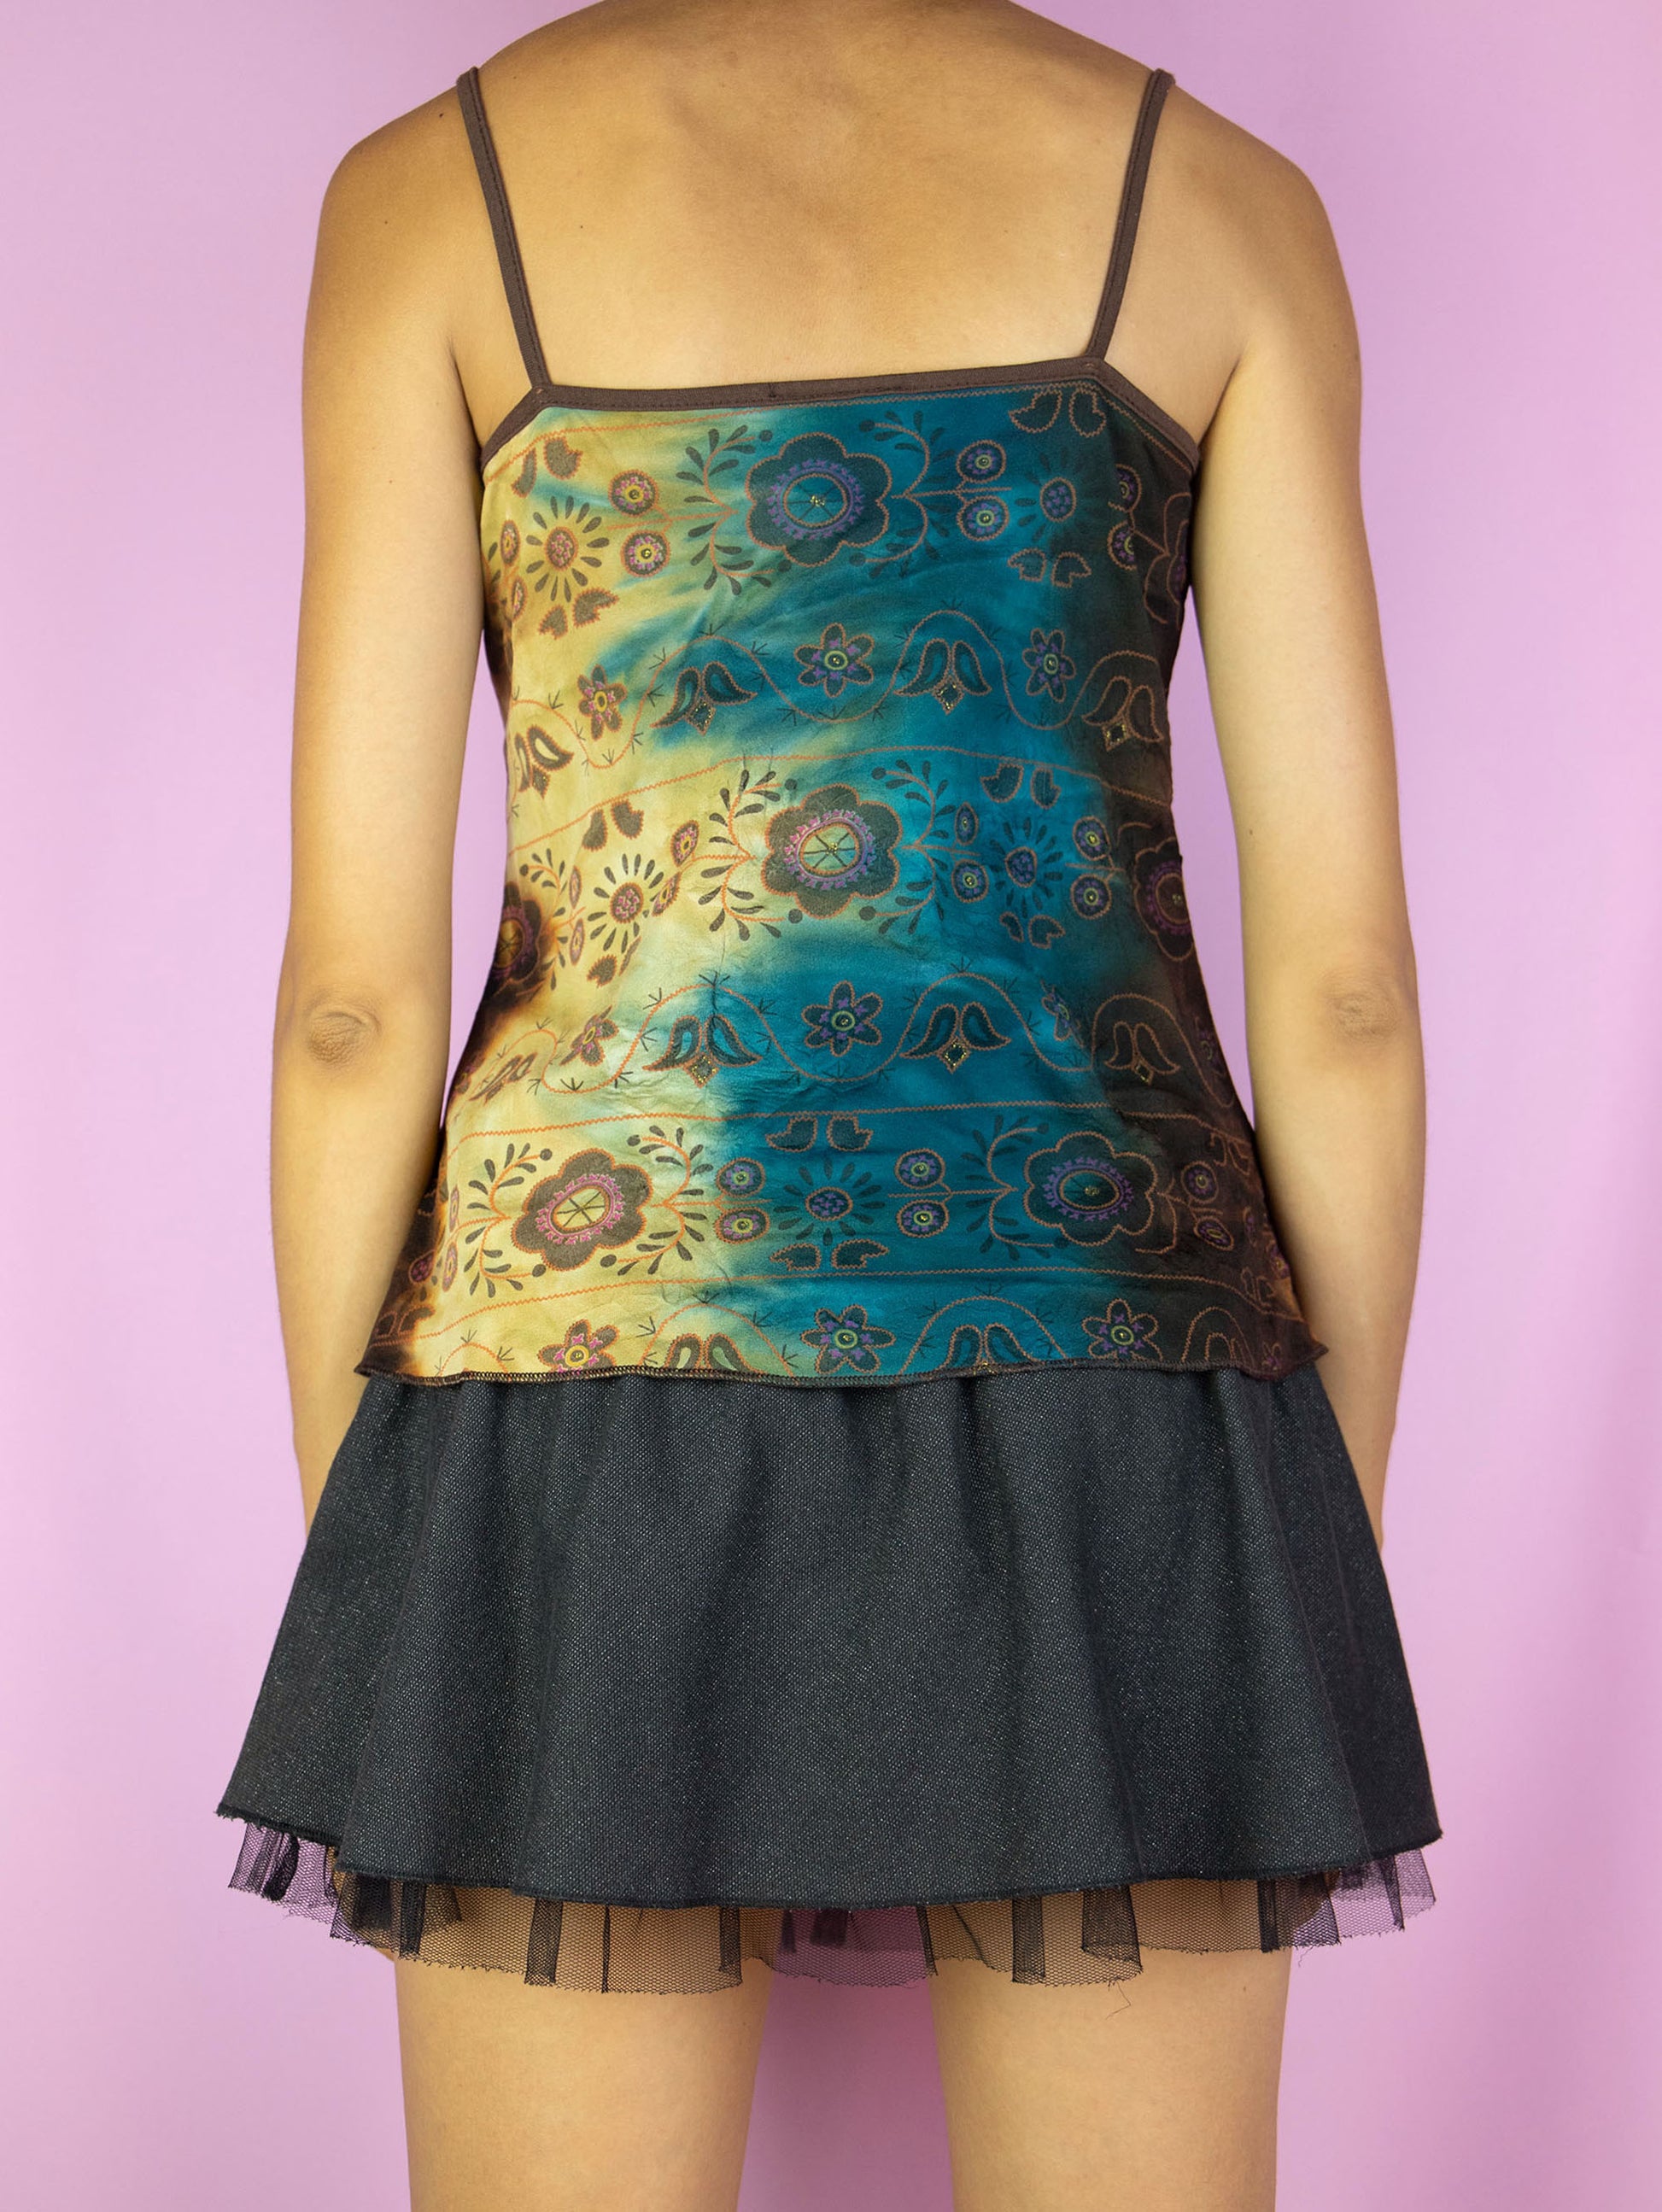 The Y2K Fairy Ruffle Cami Top is a vintage blue and brown multicolored tie-dye floral pattern tank top with a ruffled, ruched front. Boho grunge 2000s summer shirt.